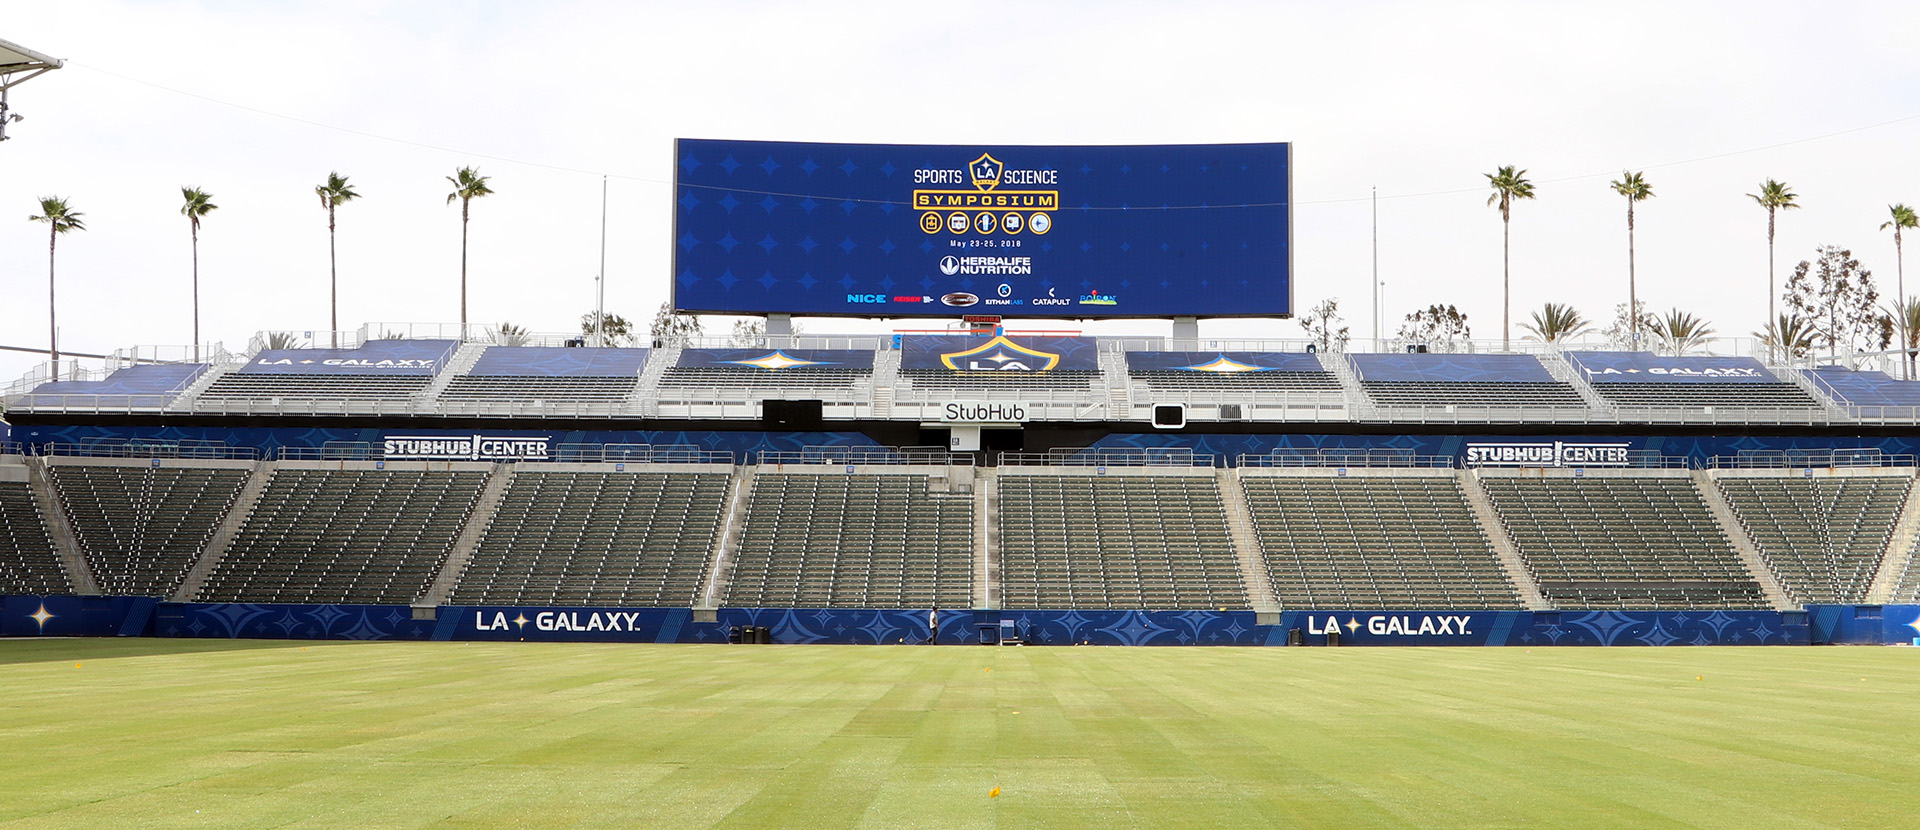 The pitch and the stands at the LA Galaxy stadium